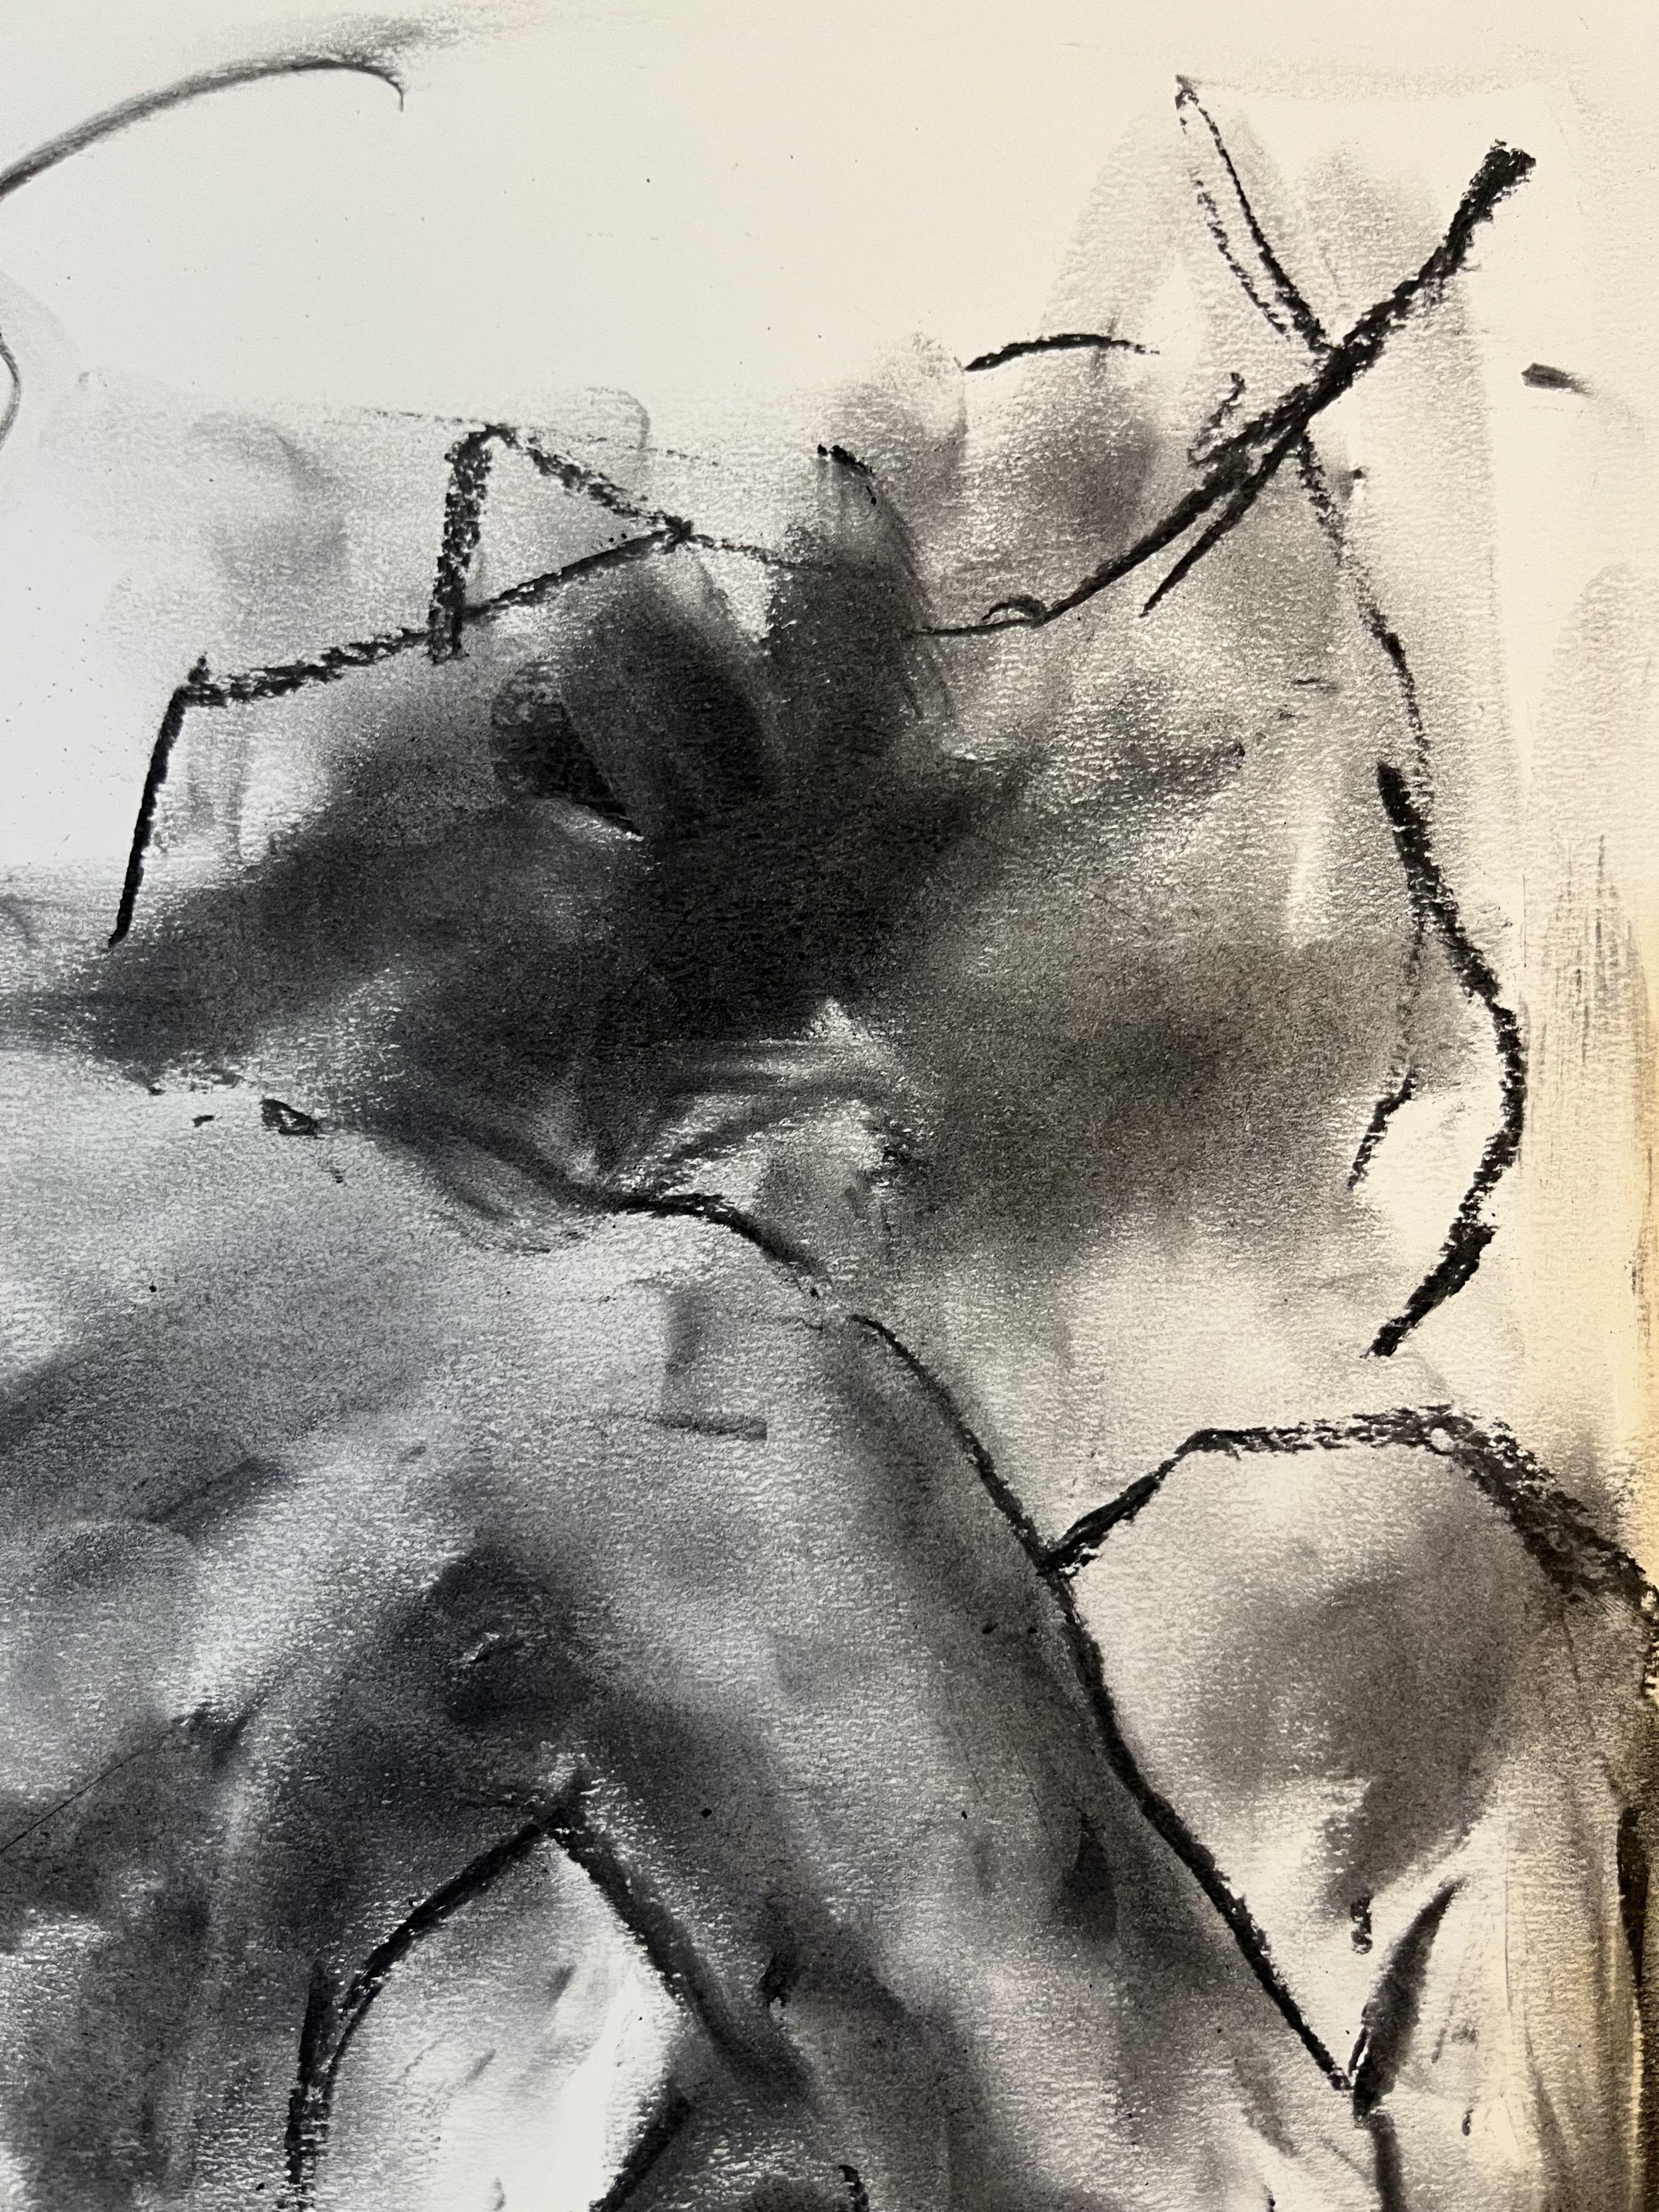 Explore, Drawing, Charcoal on Paper - Impressionist Art by James Shipton